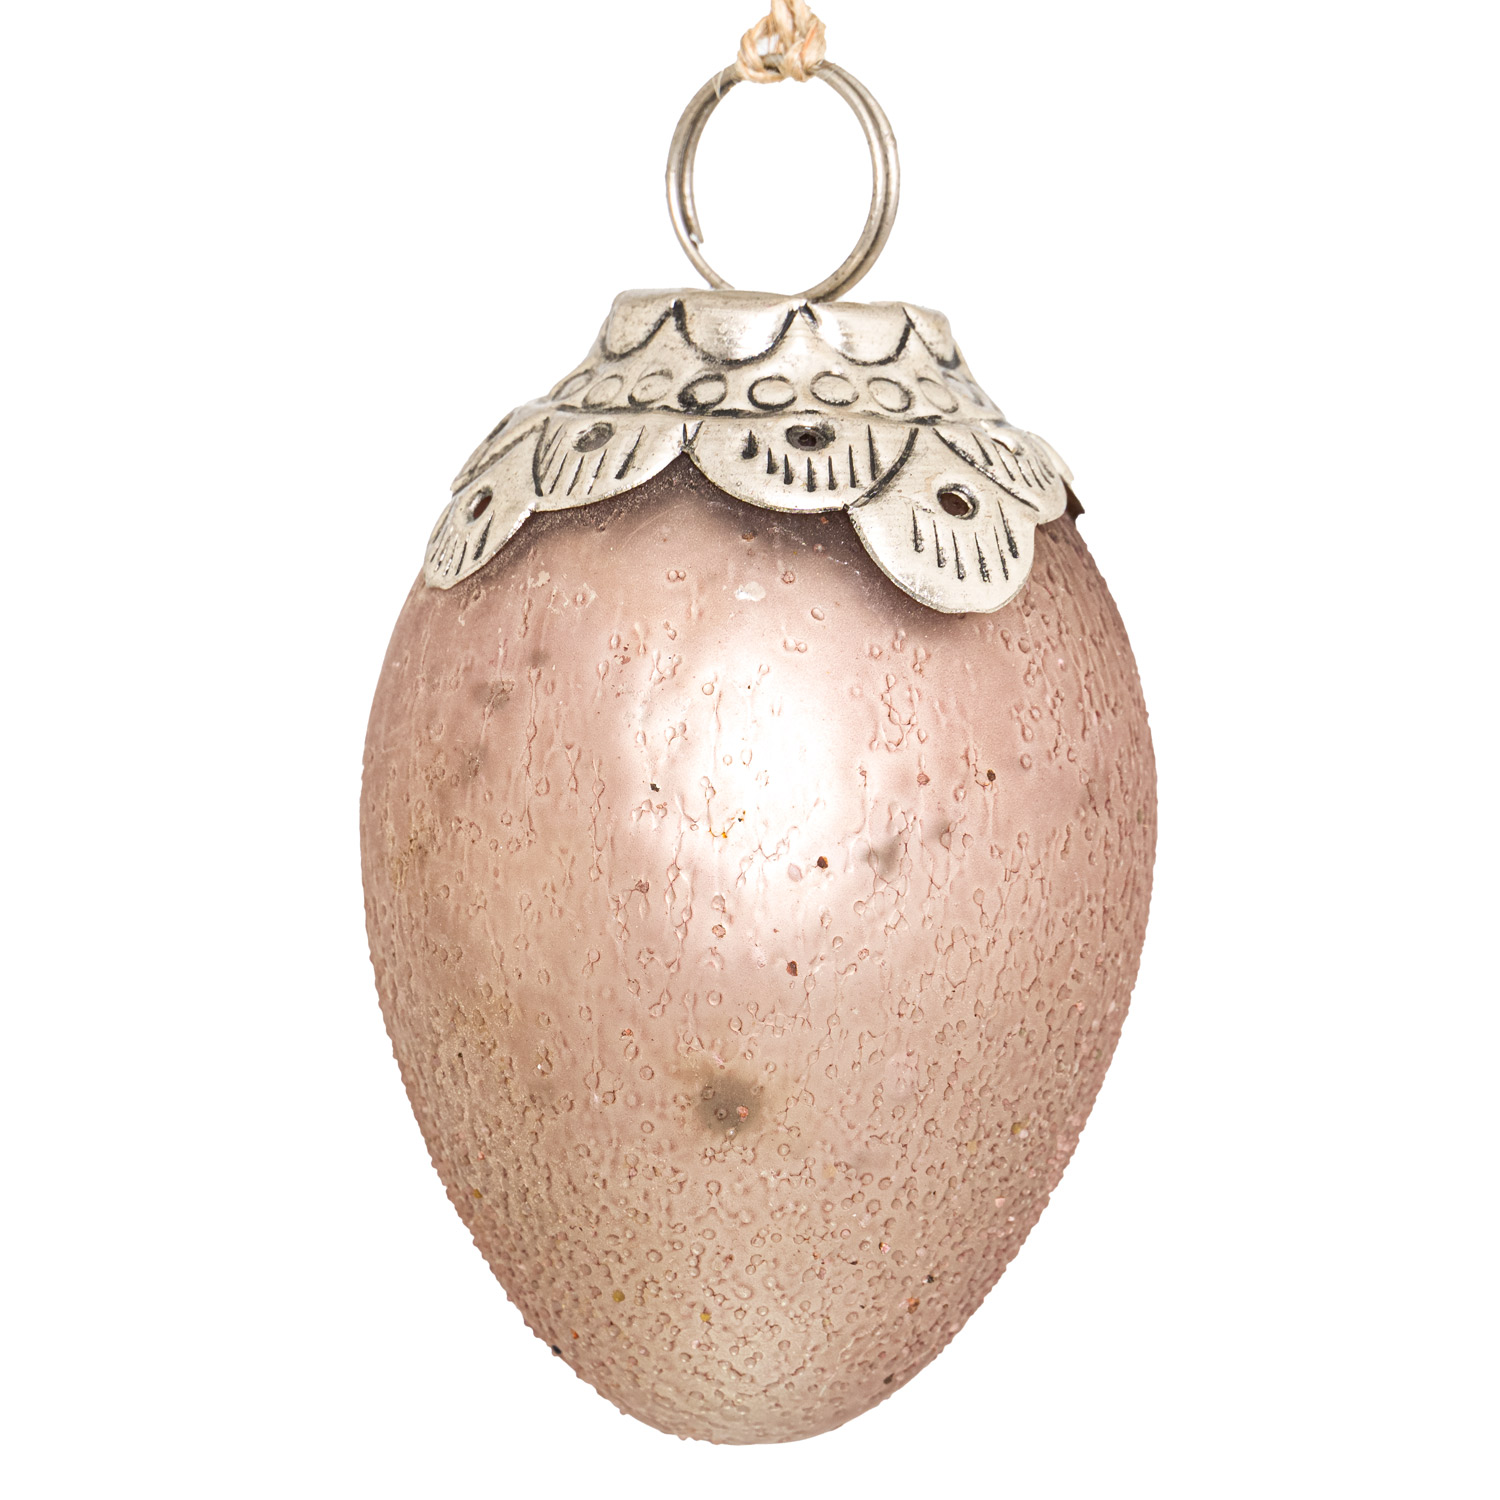 The Noel Collection Venus Small Oval Crested Bauble - Image 1